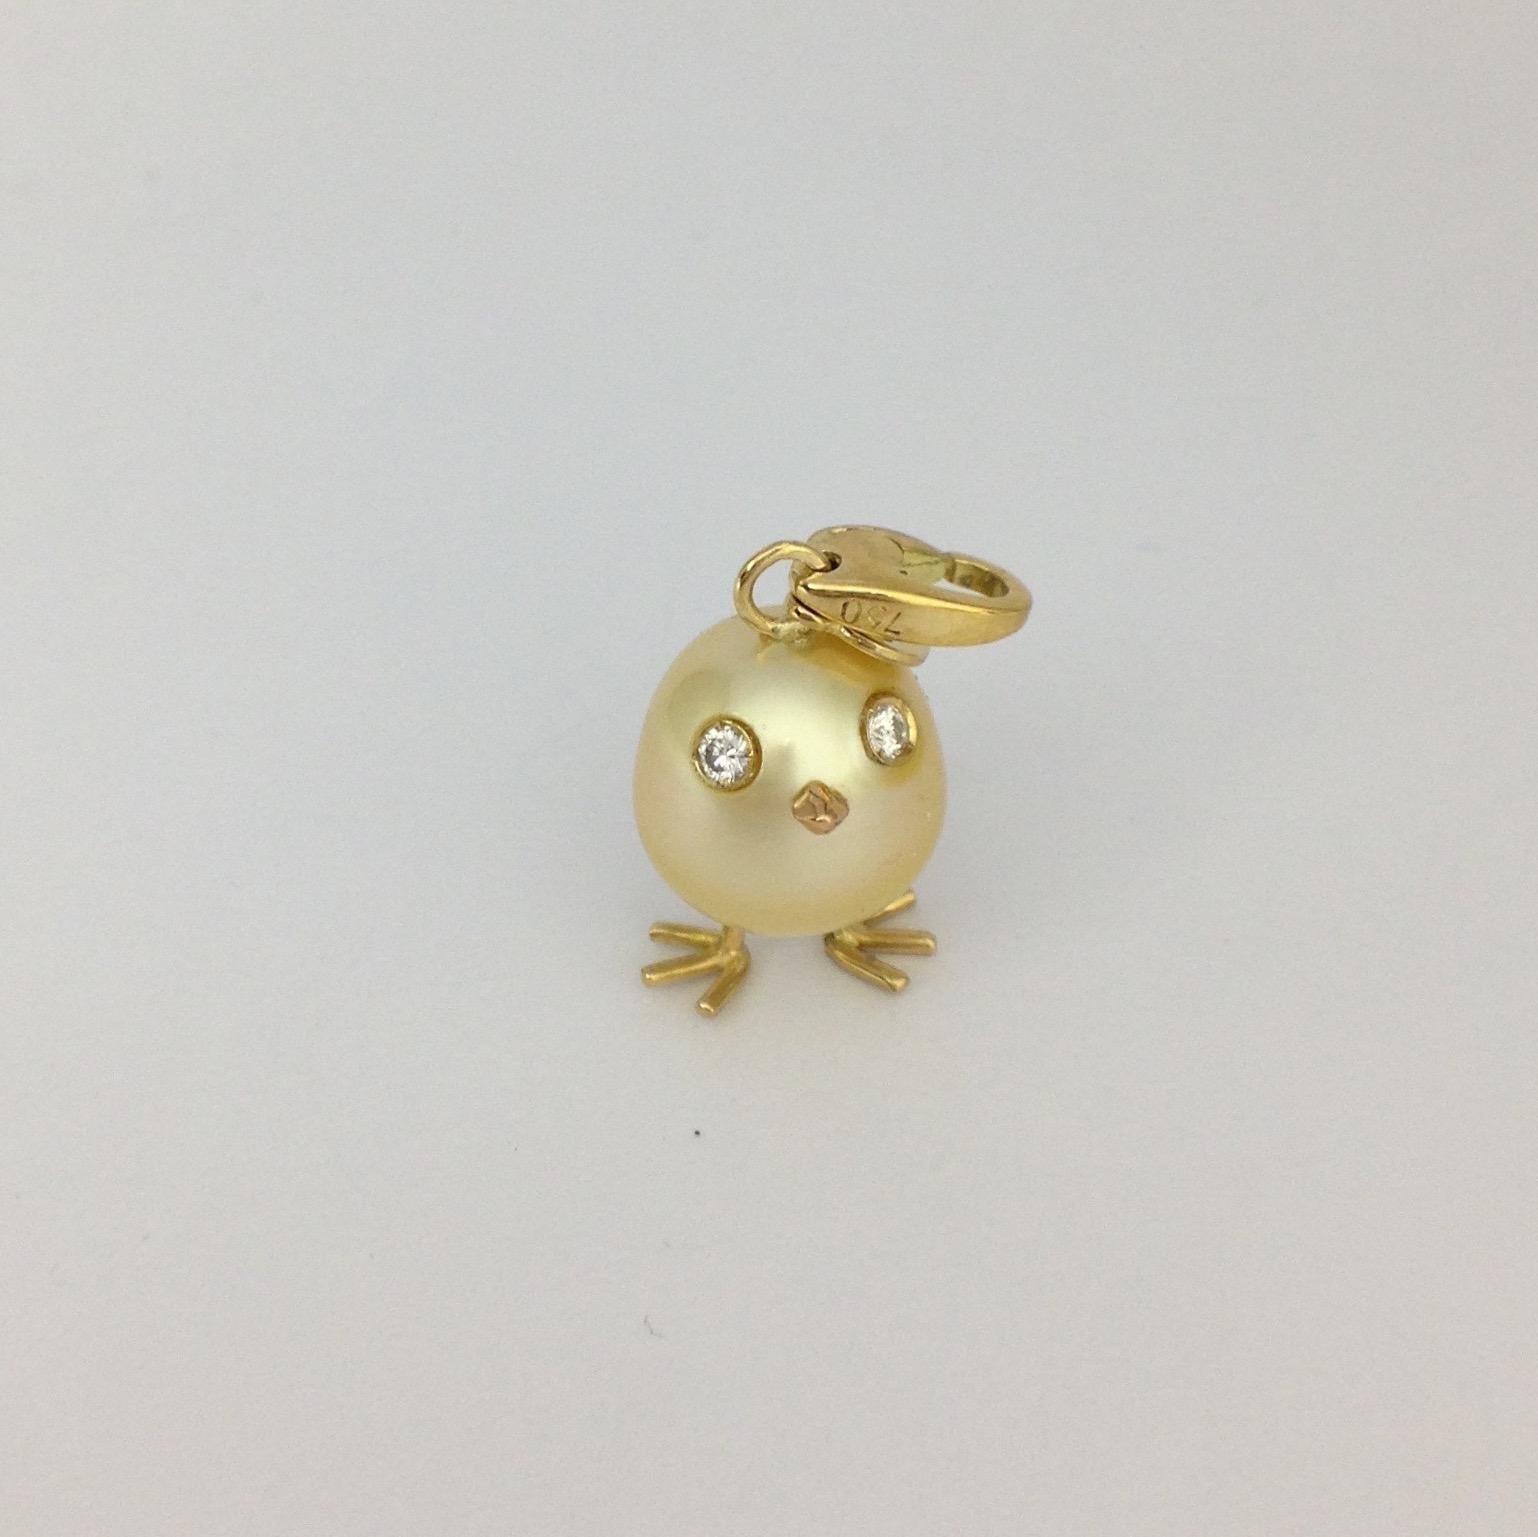 A oval shape Australian pearl has been carefully crafted to make a chick. He has his two legs, two eyes encrusted with two white diamonds and his beak. 
The gold is yellow for all the particulars, apart for the beak that is in red gold.
The ring for